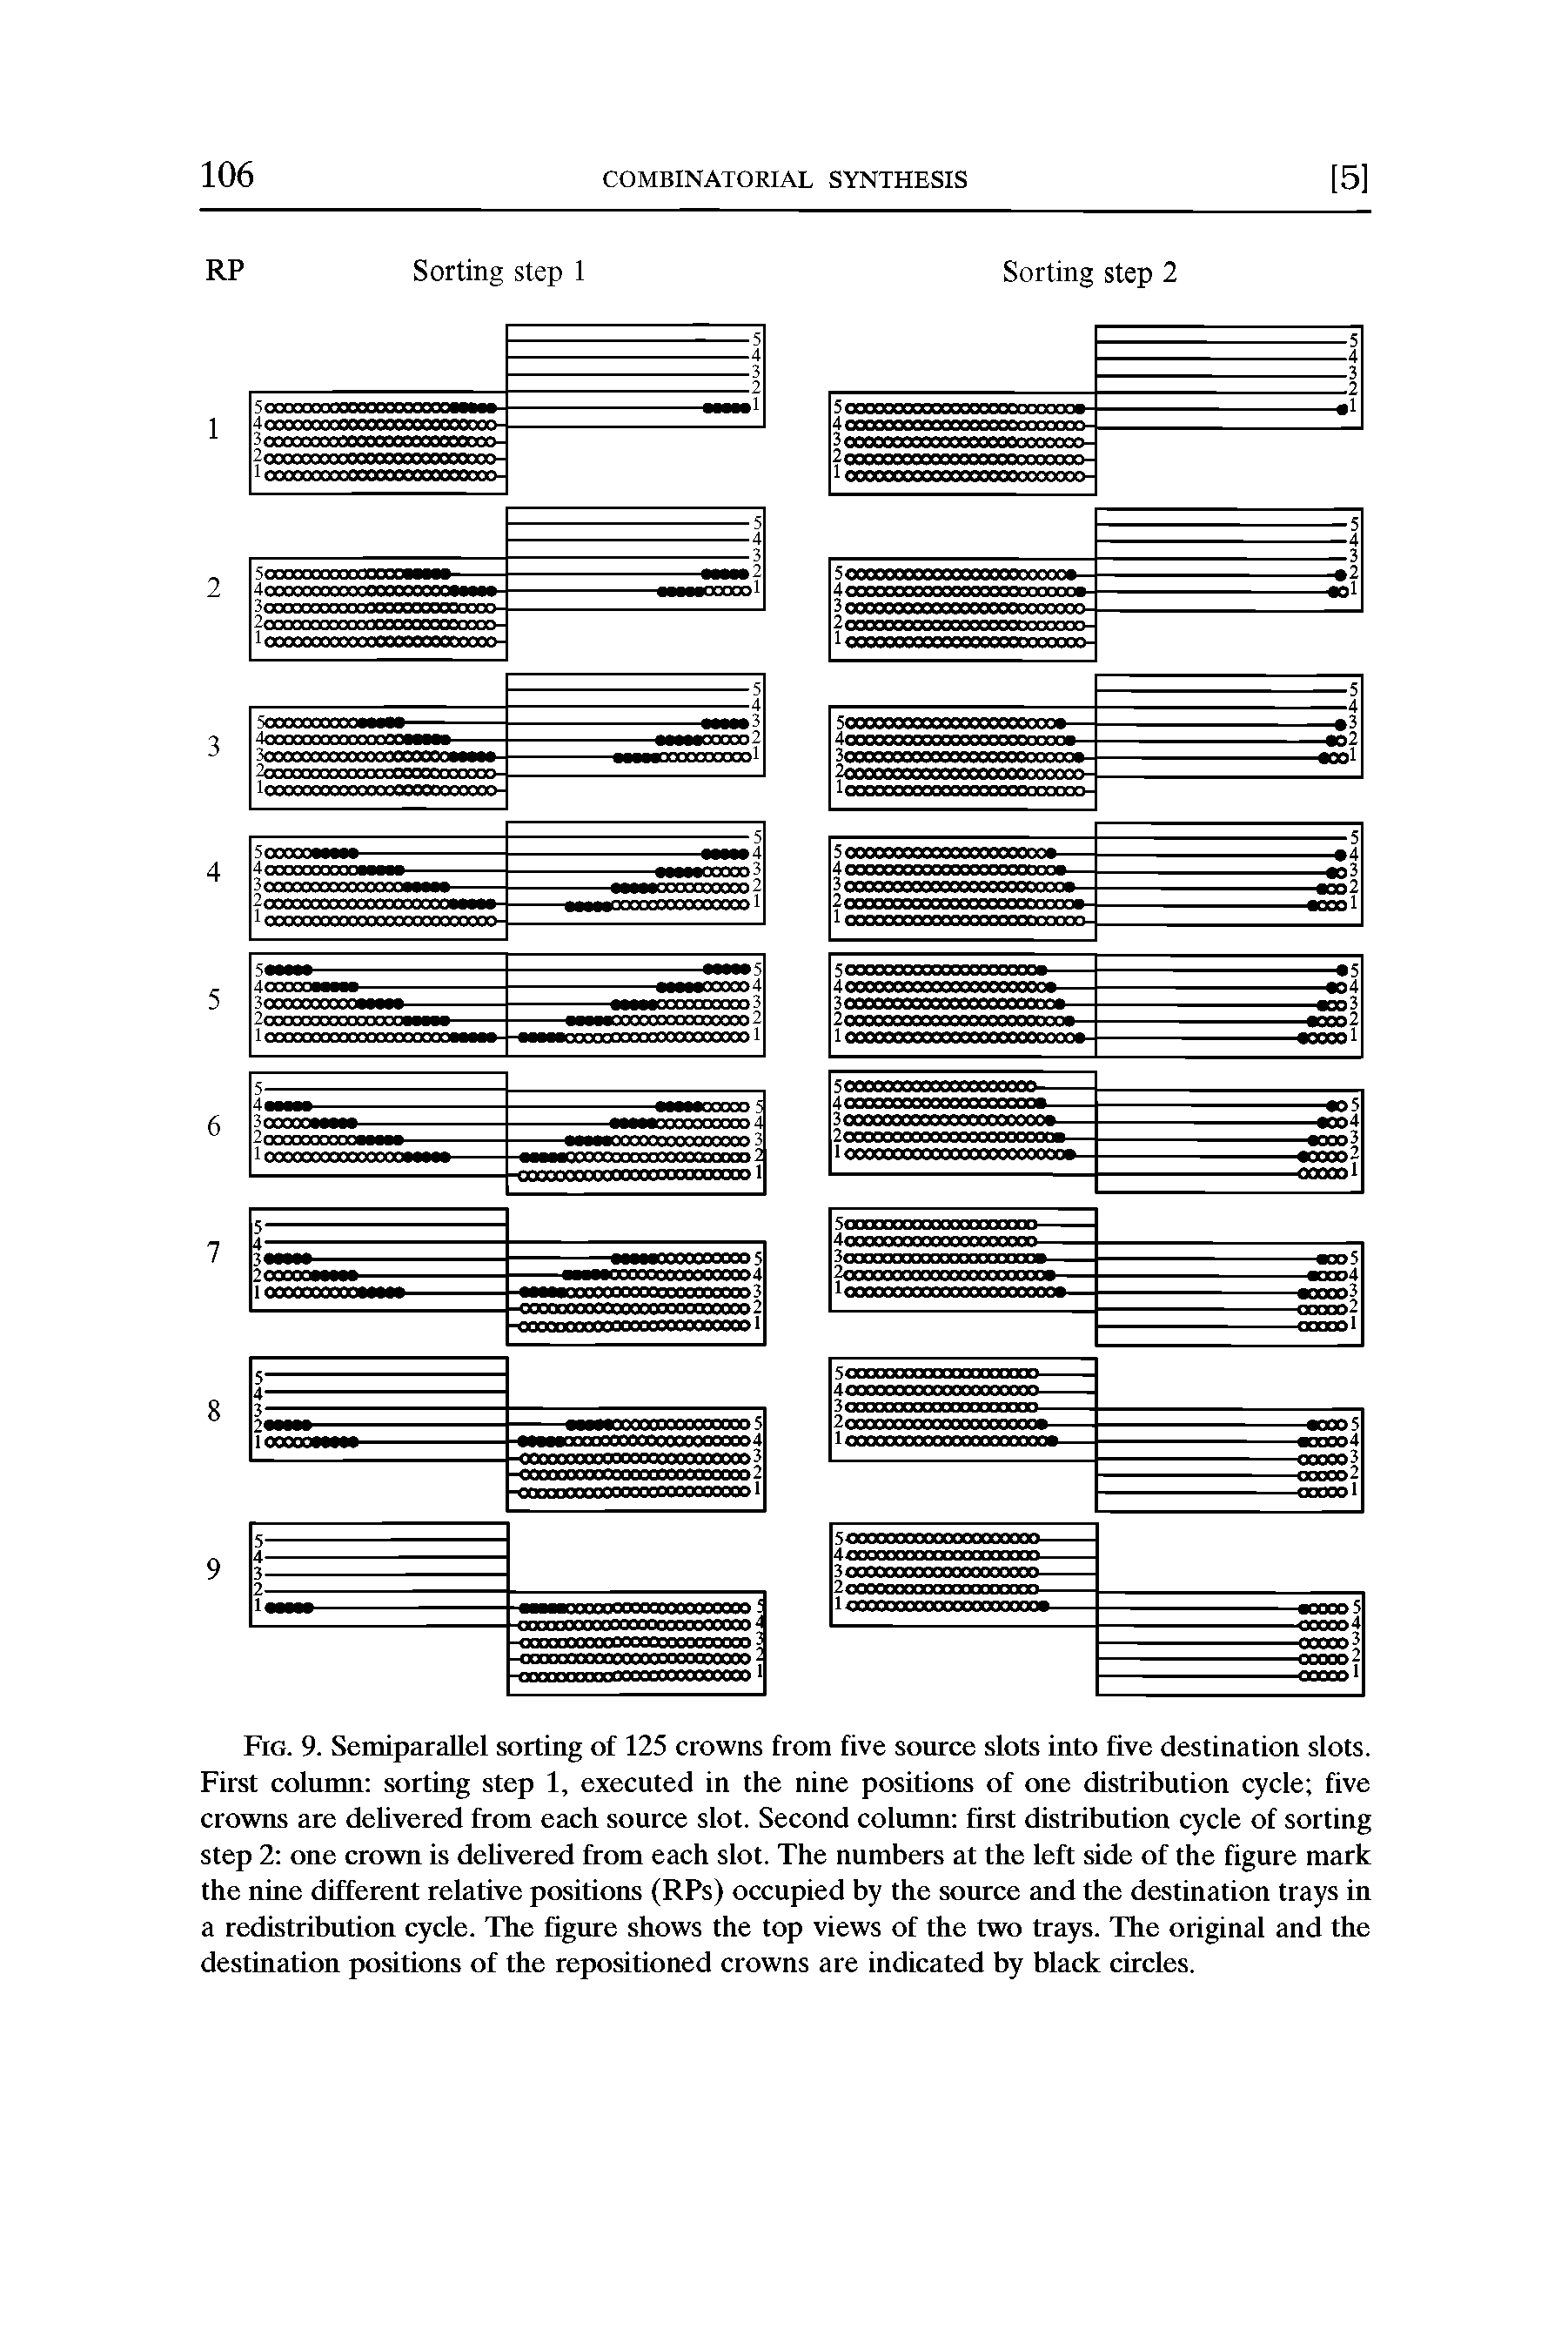 Fig. 9. Semiparallel sorting of 125 crowns from five source slots into five destination slots. First column sorting step 1, executed in the nine positions of one distribution cycle five crowns are delivered from each source slot. Second column first distribution cycle of sorting step 2 one crown is delivered from each slot. The numbers at the left side of the figure mark the nine different relative positions (RPs) occupied by the source and the destination trays in a redistribution cycle. The figure shows the top views of the two trays. The original and the destination positions of the repositioned crowns are indicated by black circles.